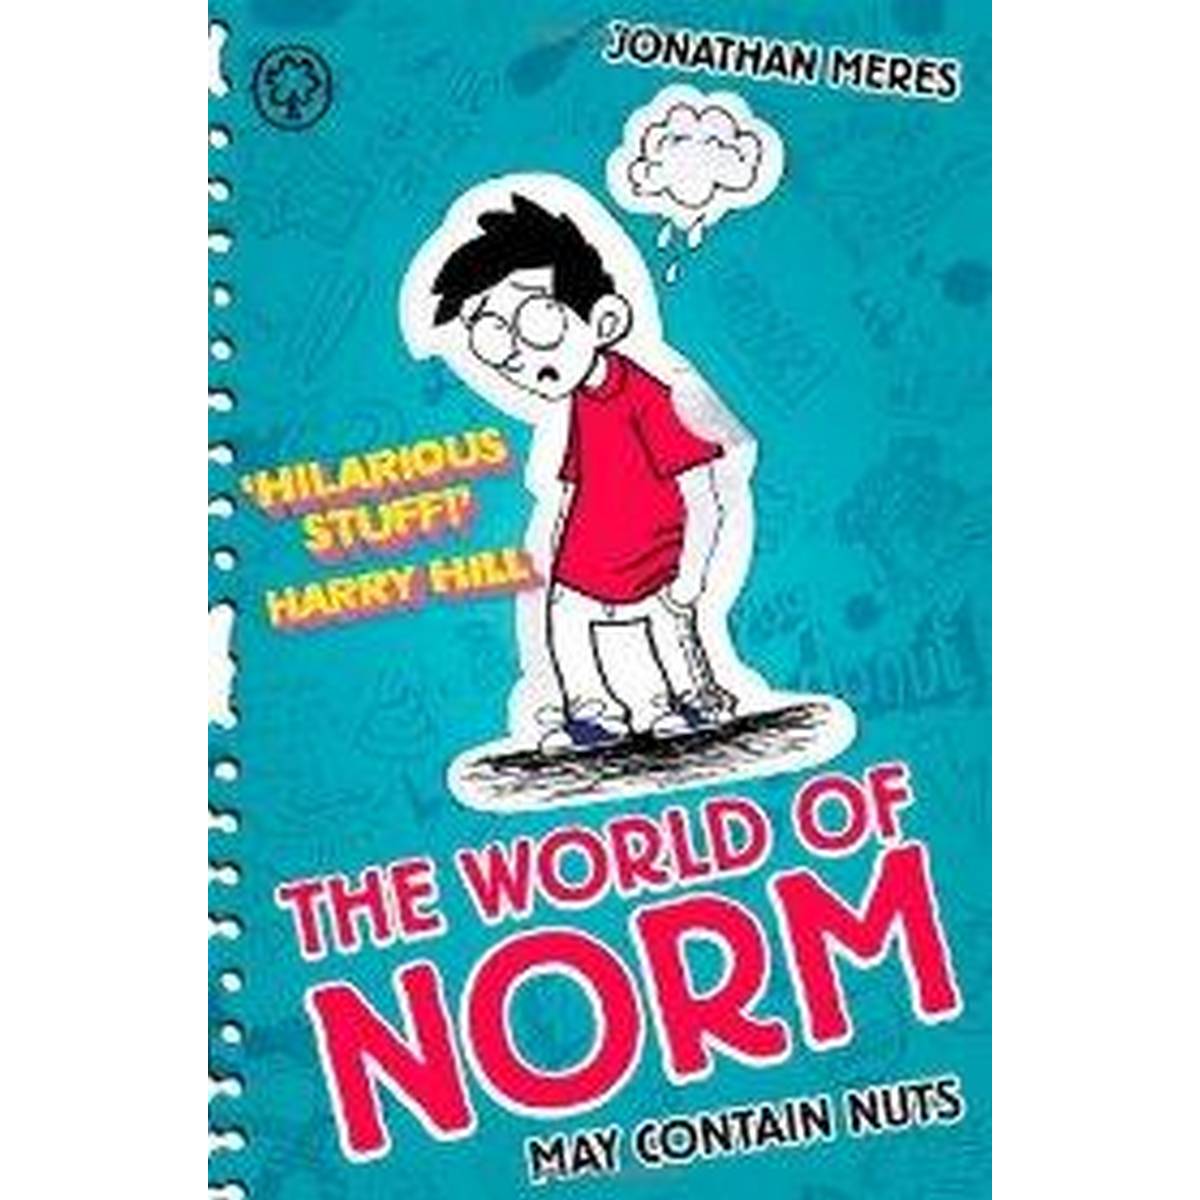 The World of Norm May Contain Nuts